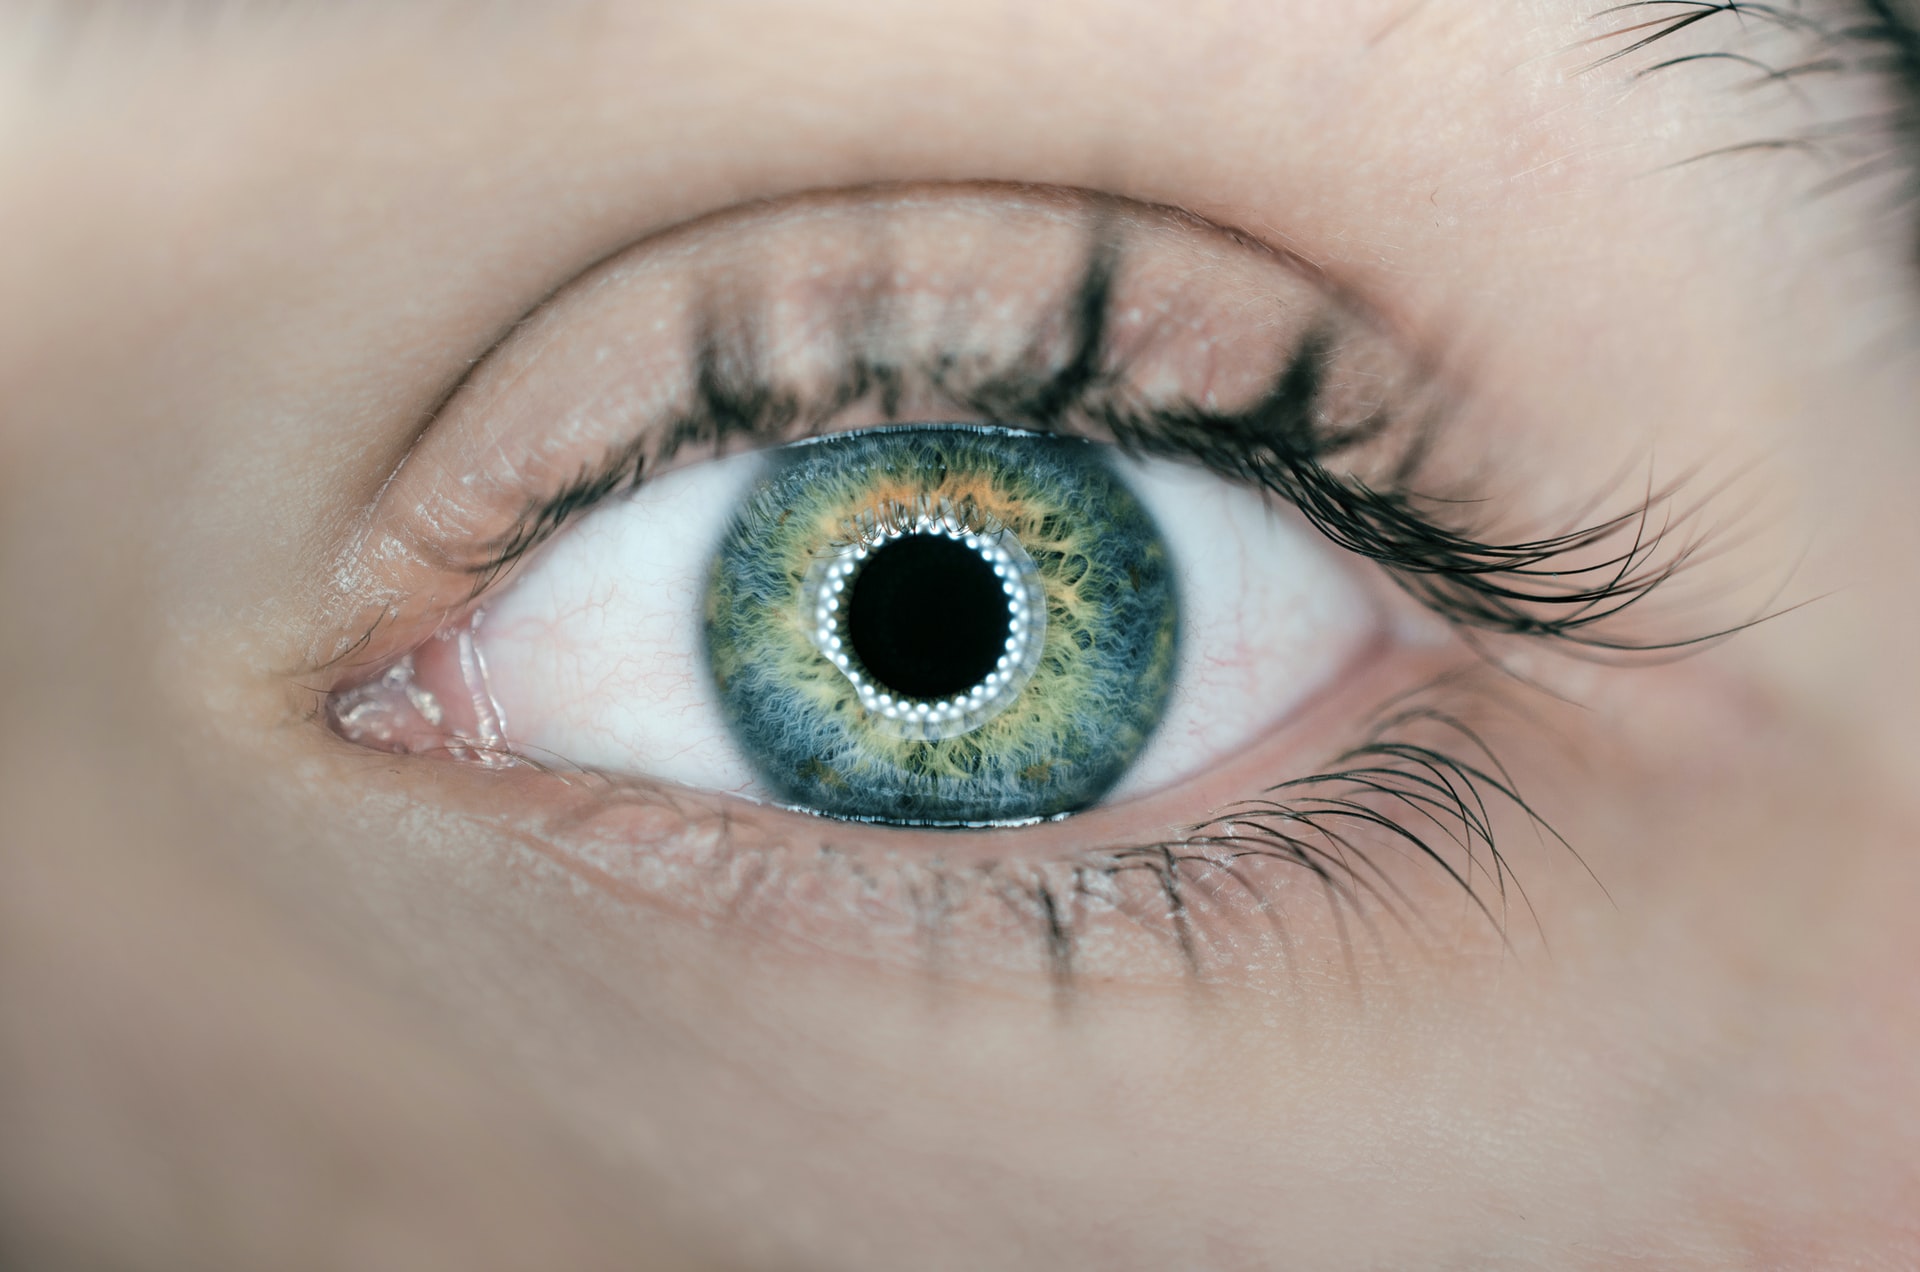 Close up of a human eye with bright white orb-like lasers in the pupil